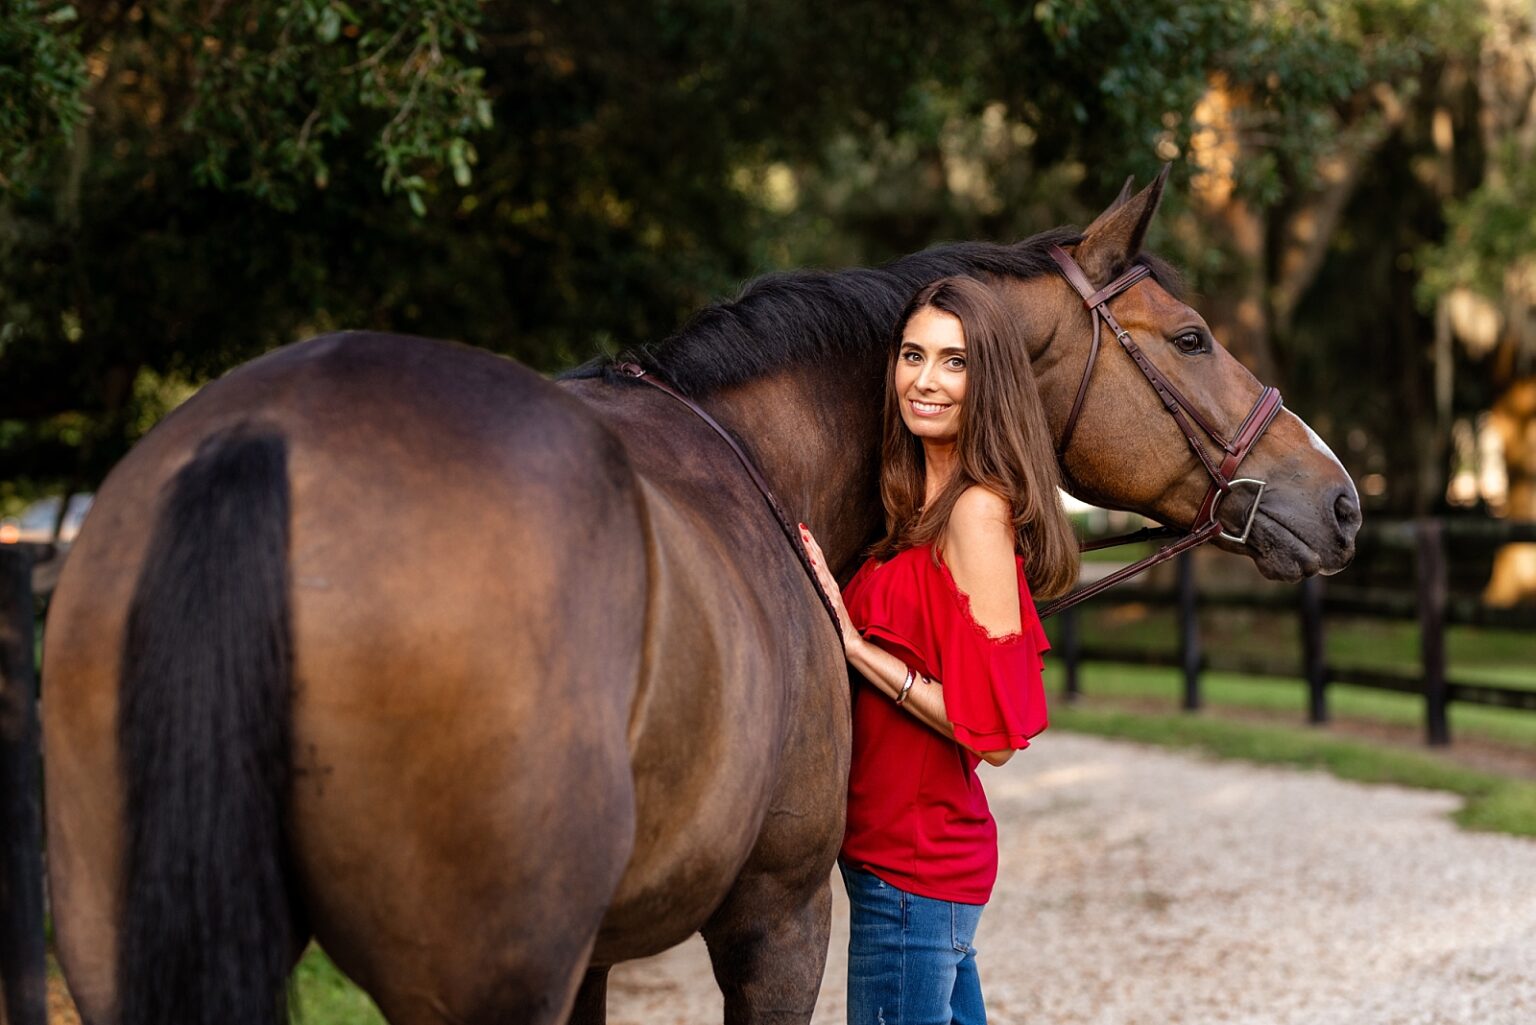 Horse and rider photoshoot in Tallahassee with casual outfit with red top and jeans. What to wear for equestrian photoshoot.